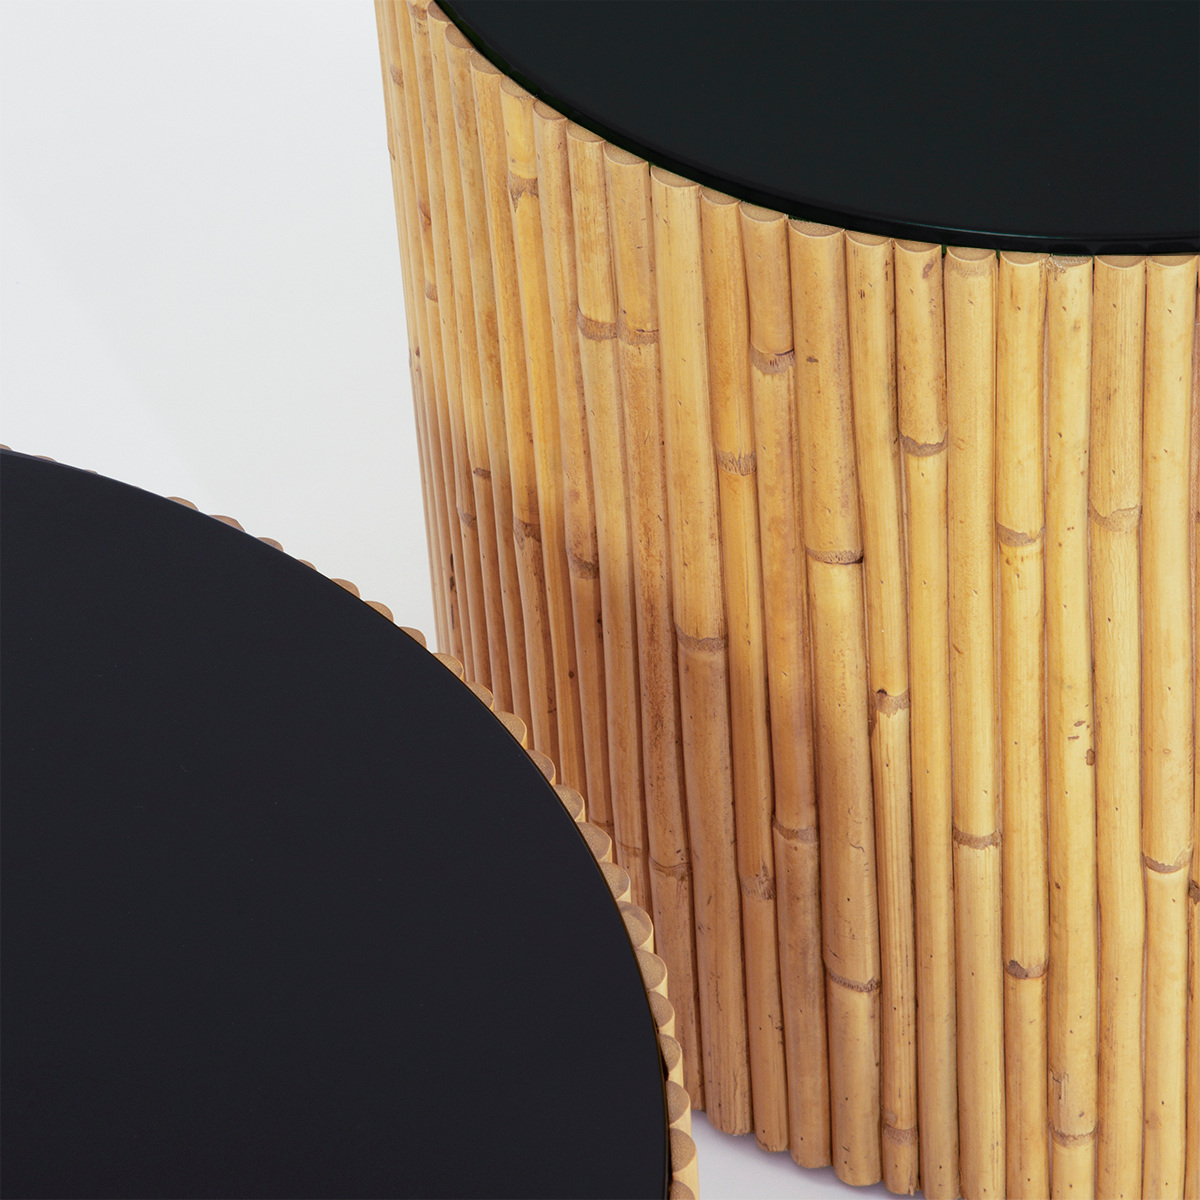 Duo of Coffee Tables Rivera, Natural / Black - ø60 x H30 cm and ø45 x H40 cm - Rattan / Lacquered wood - image 2